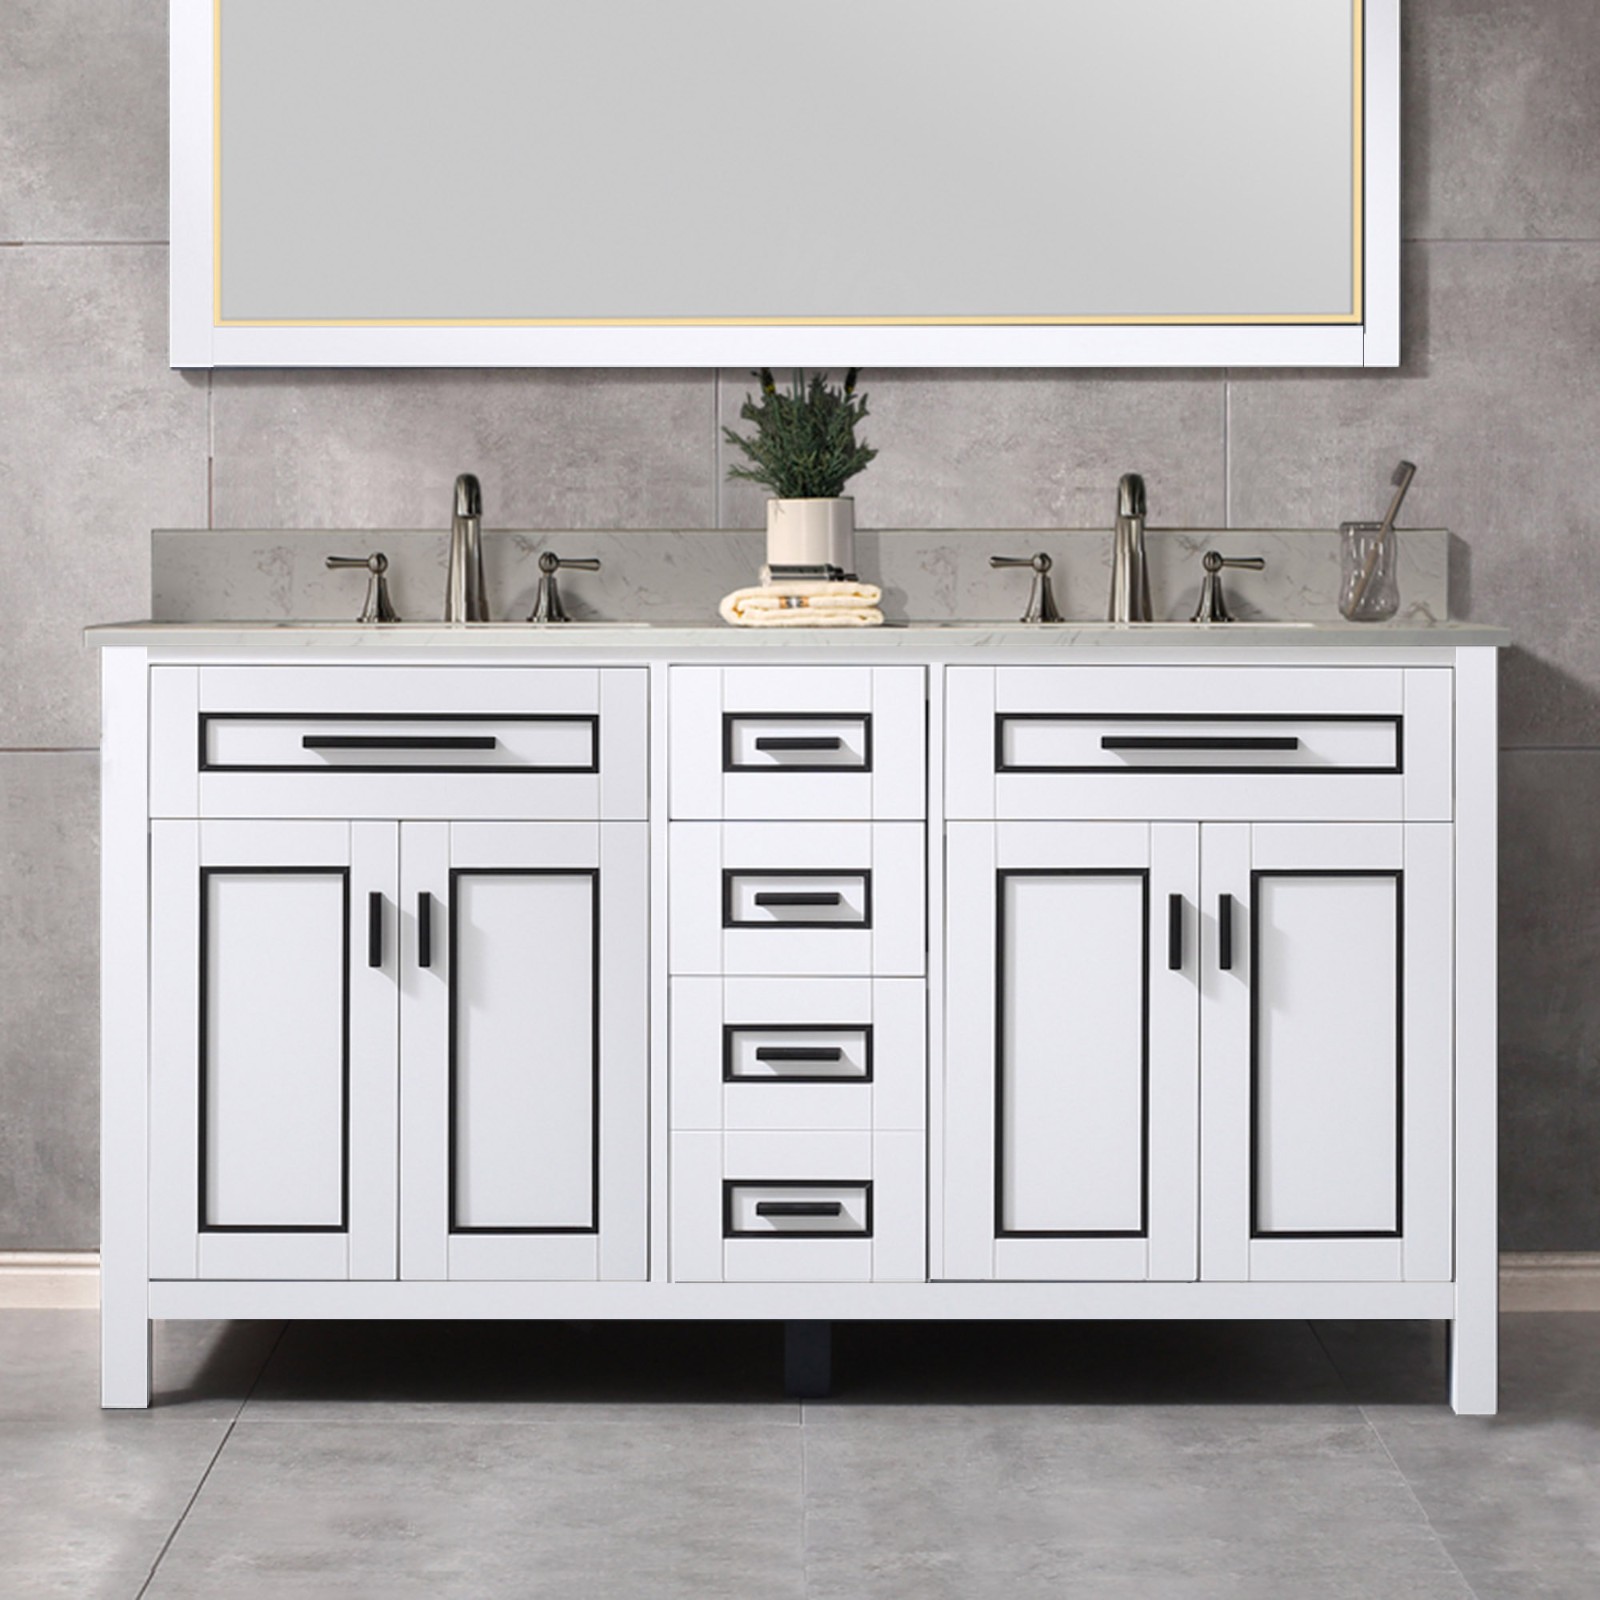  WOODBRIDGE Milan  61” Floor Mounted Single Basin Vanity Set with Solid Wood Cabinet in White and Engineered stone composite Vanity Top in Carrara White with Pre-installed Undermount Rectangle Bathroom Sink in White and Pre-Drilled 3-Hole for 8”Widespread_4625